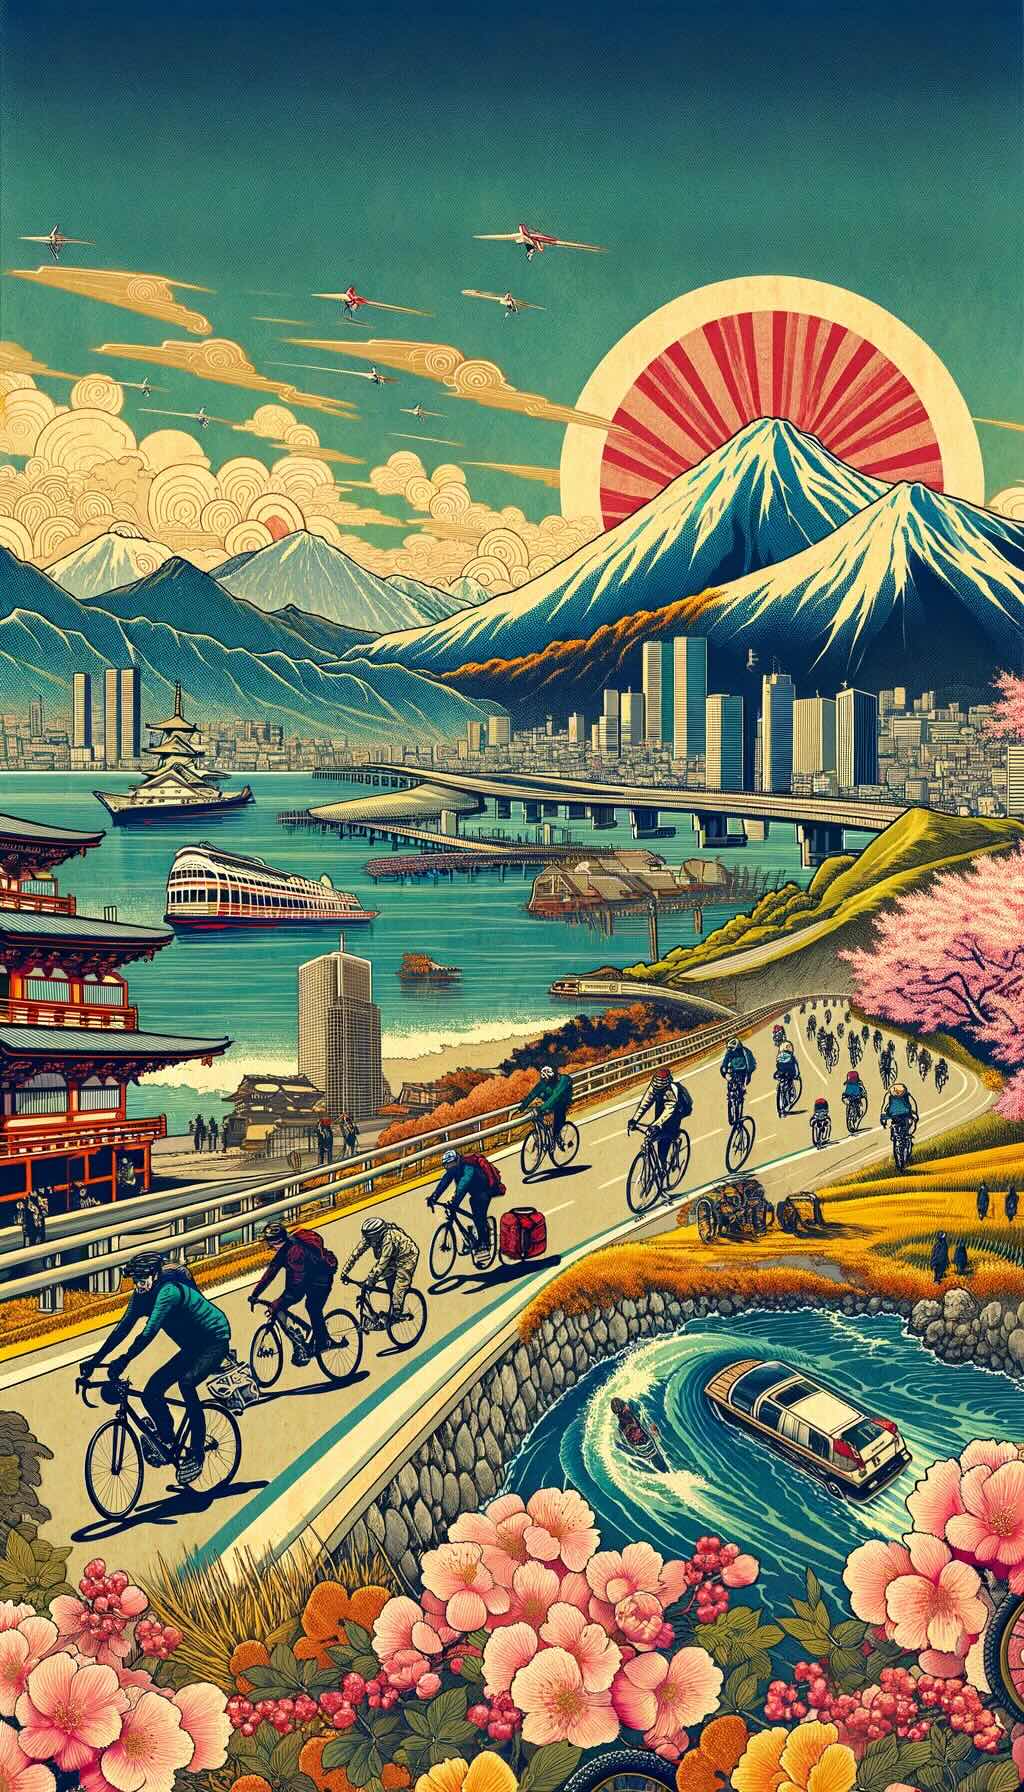 Exploring Japan by bike depicts various scenic bike routes and rides across Japan, capturing the essence of cycling exploration in the country's rich and varied environments